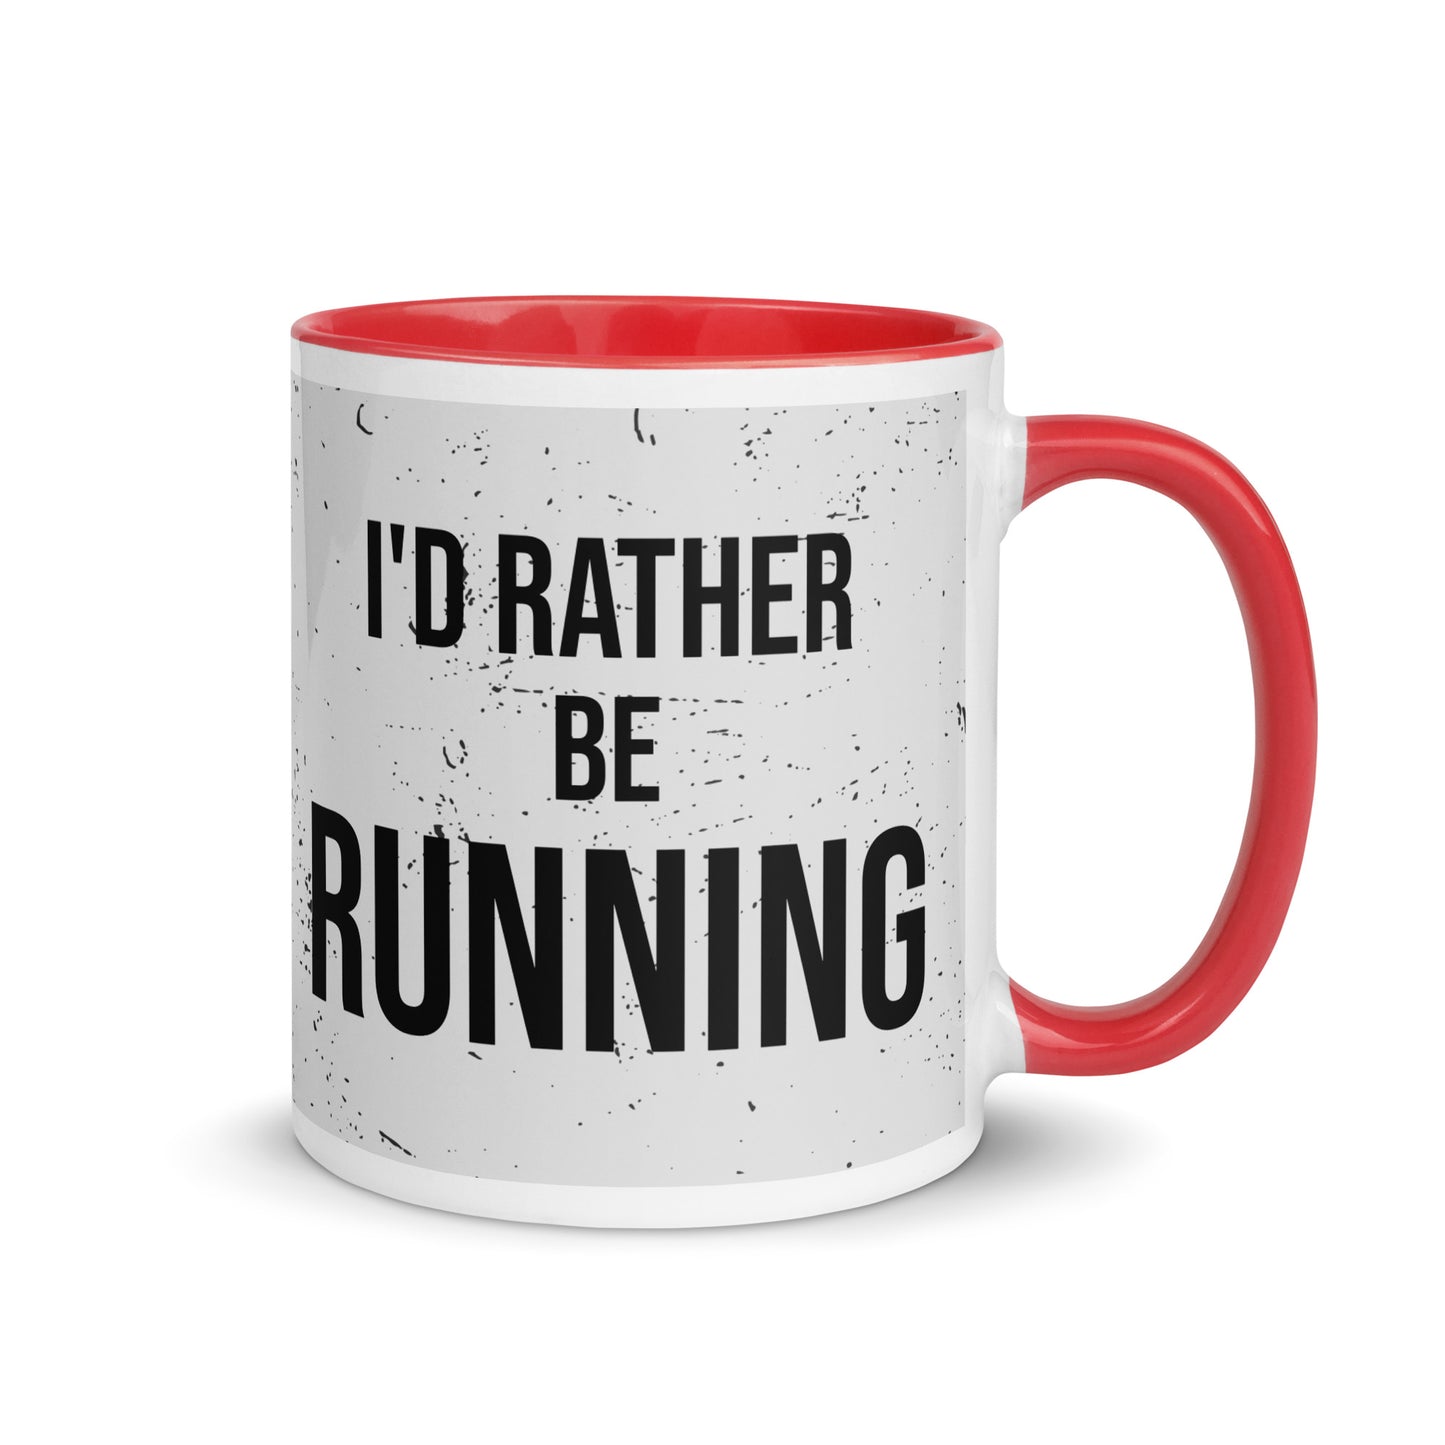 red handled mug with a grey splatter design and the phrase I'd rather be running in a black font. the perfect gift for a runner